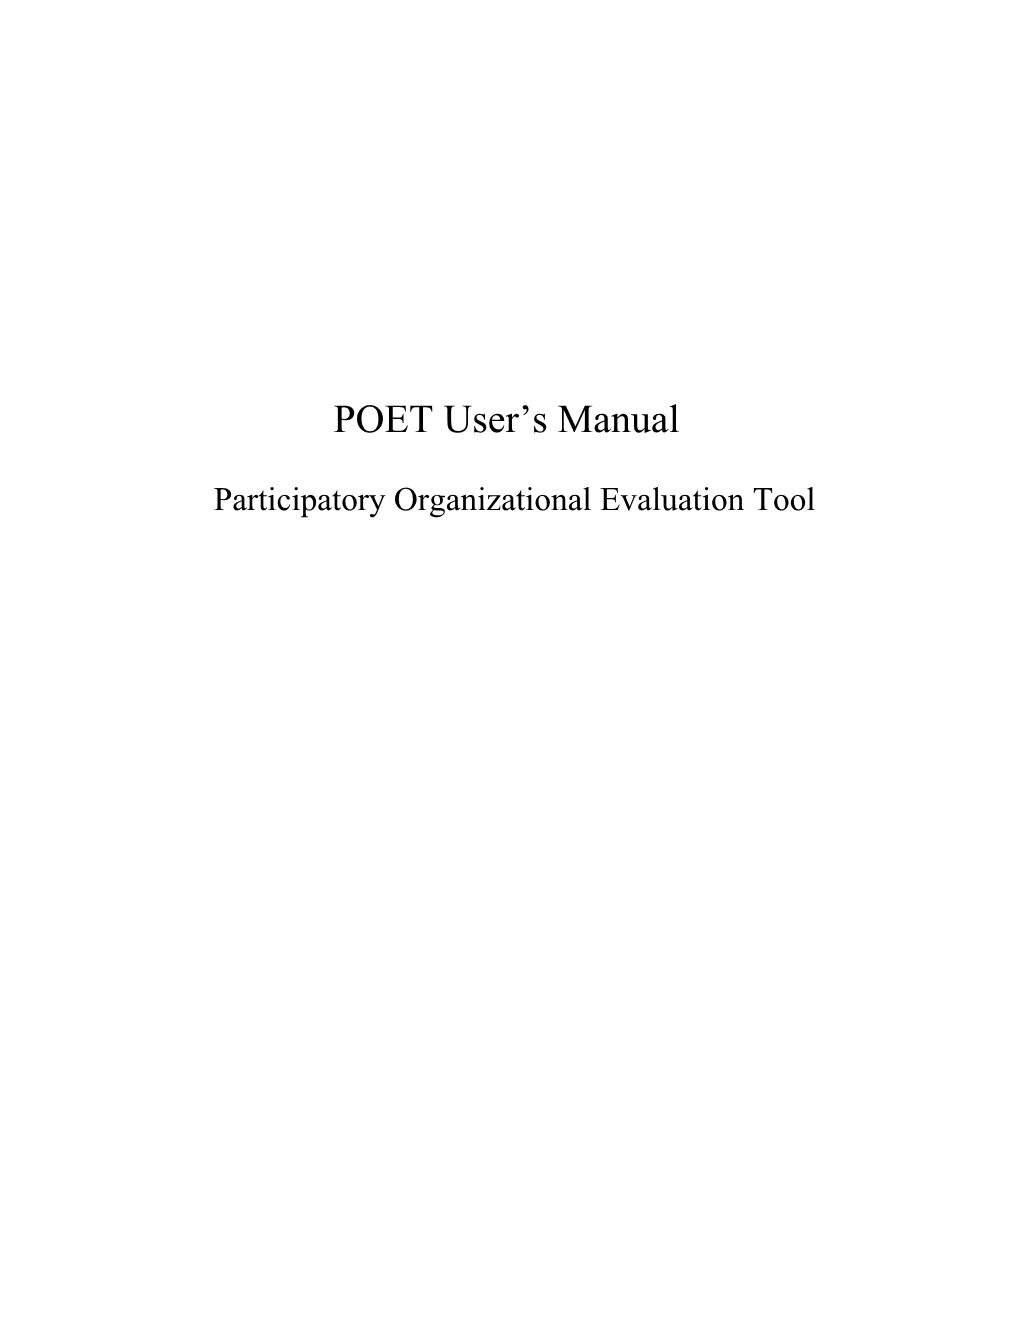 Manual for POET